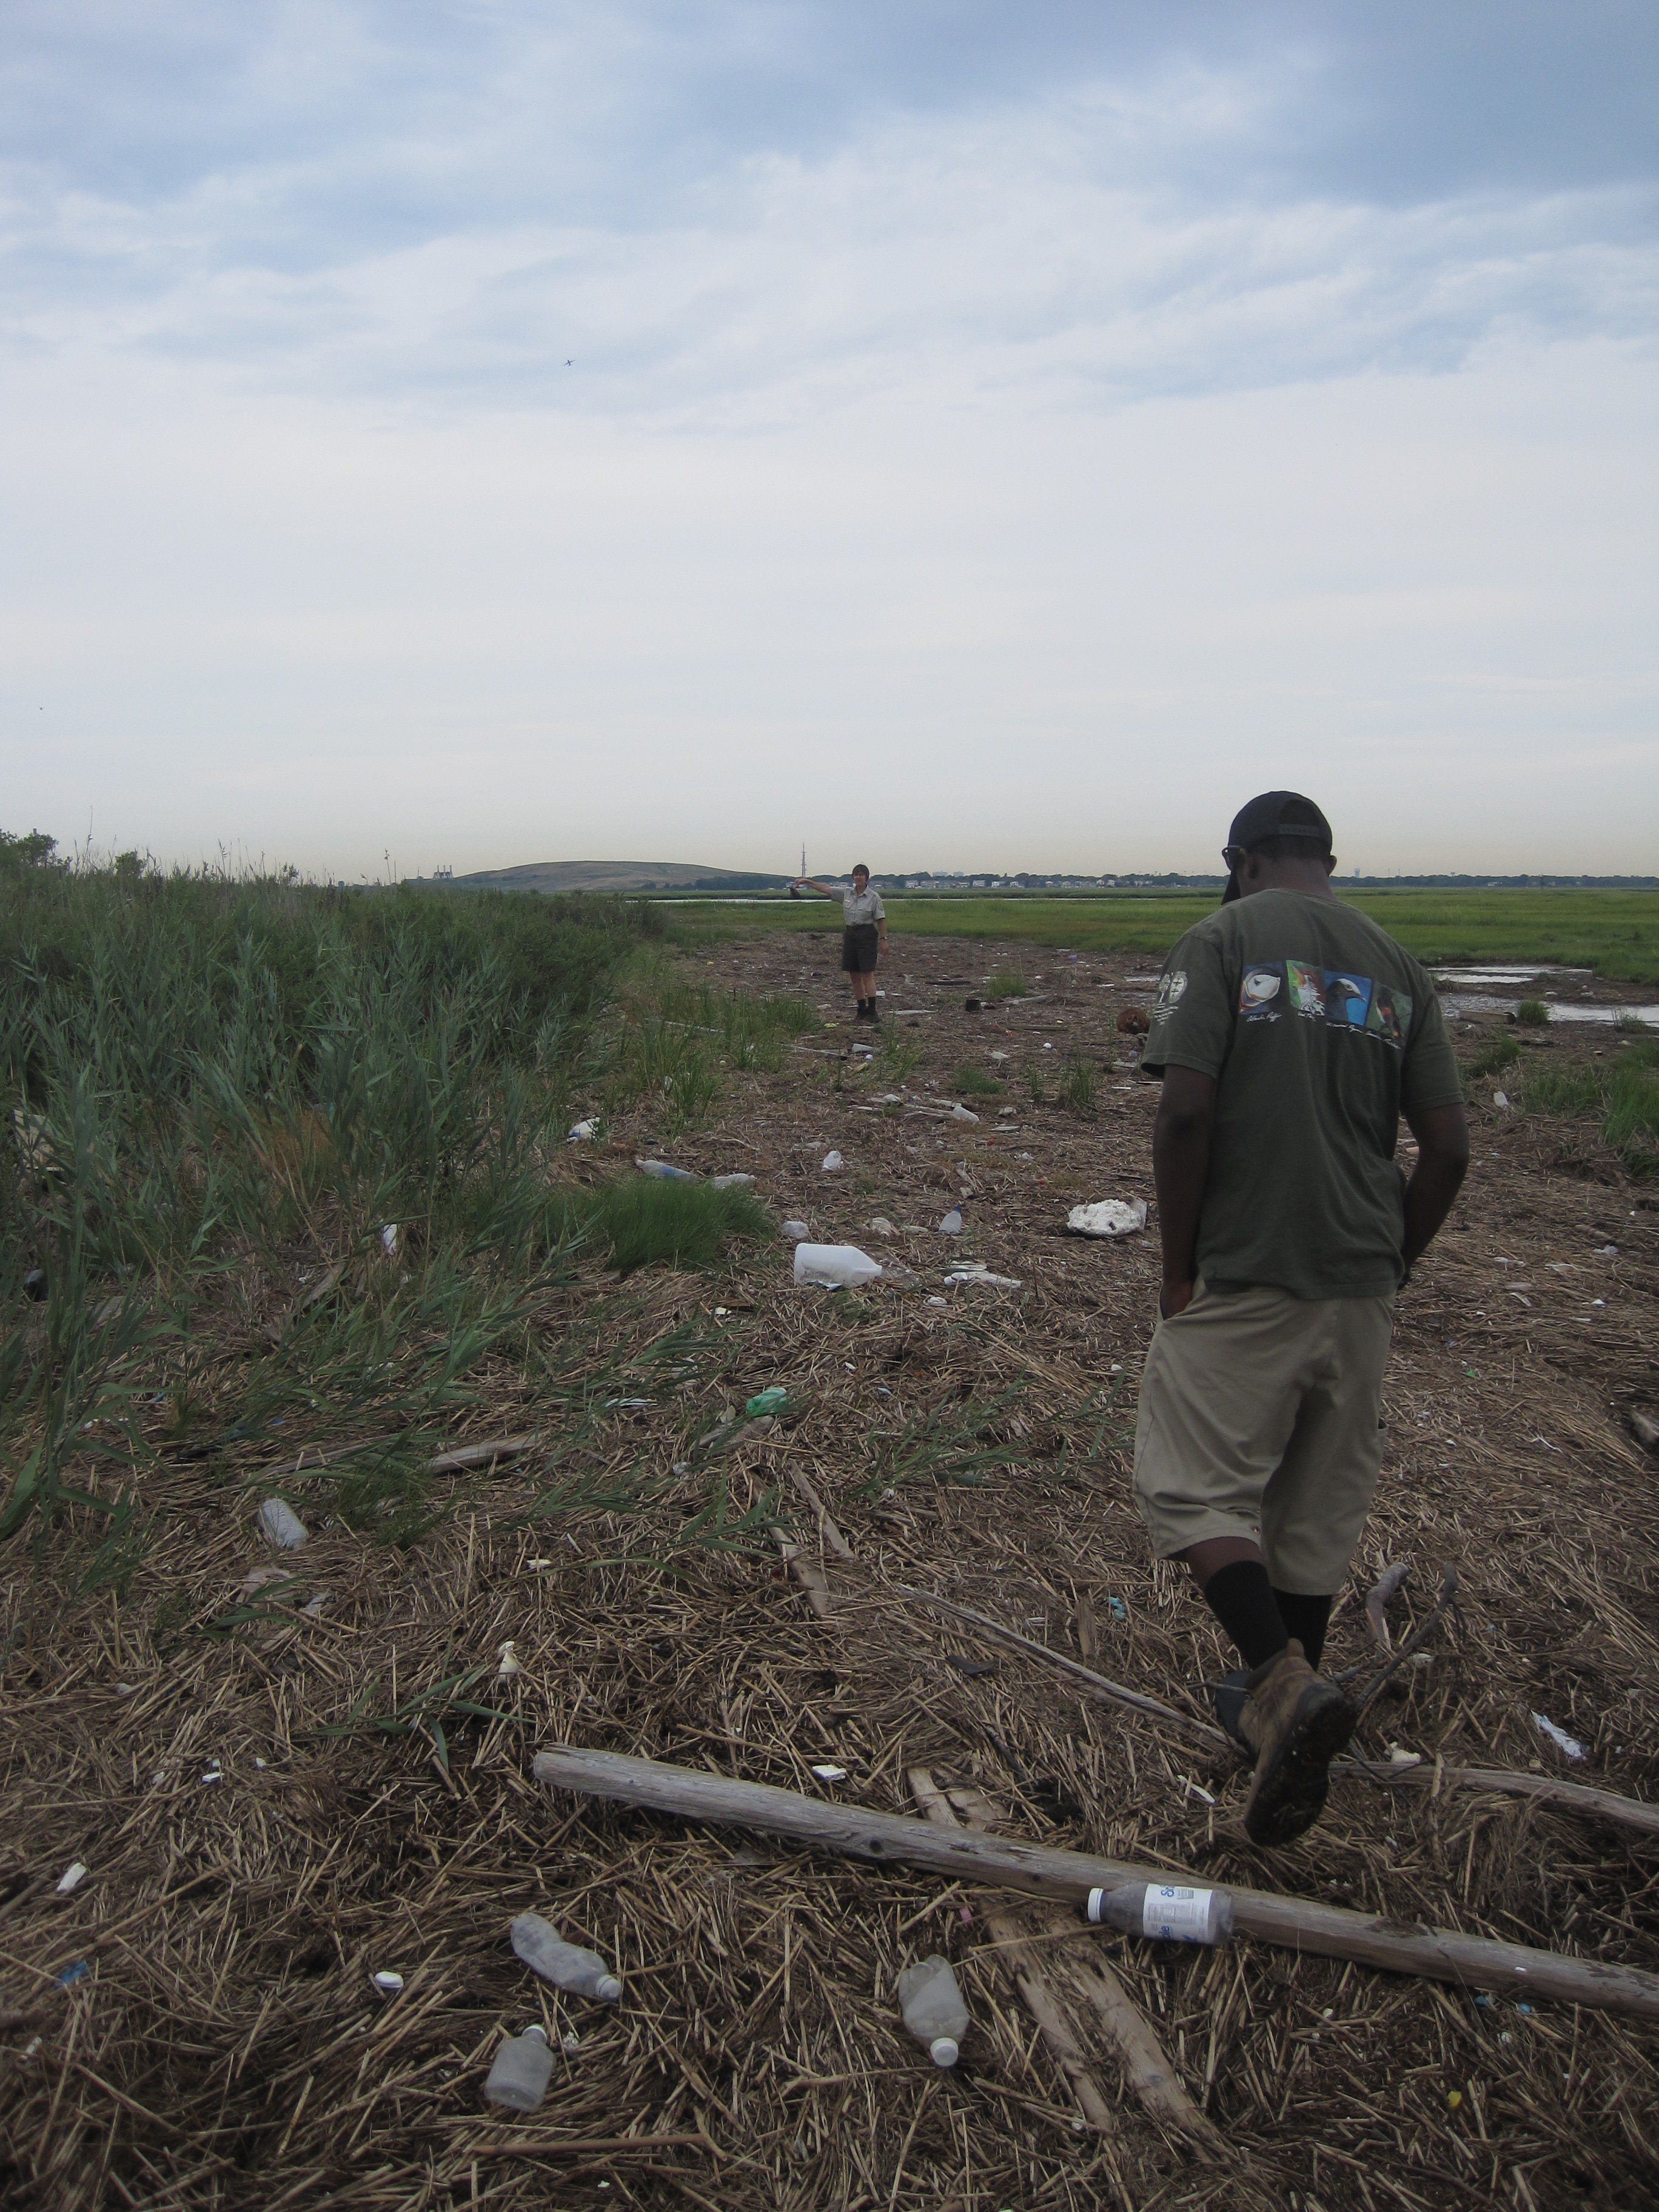 Staff walk through the marsh assessing damage from a recent storm